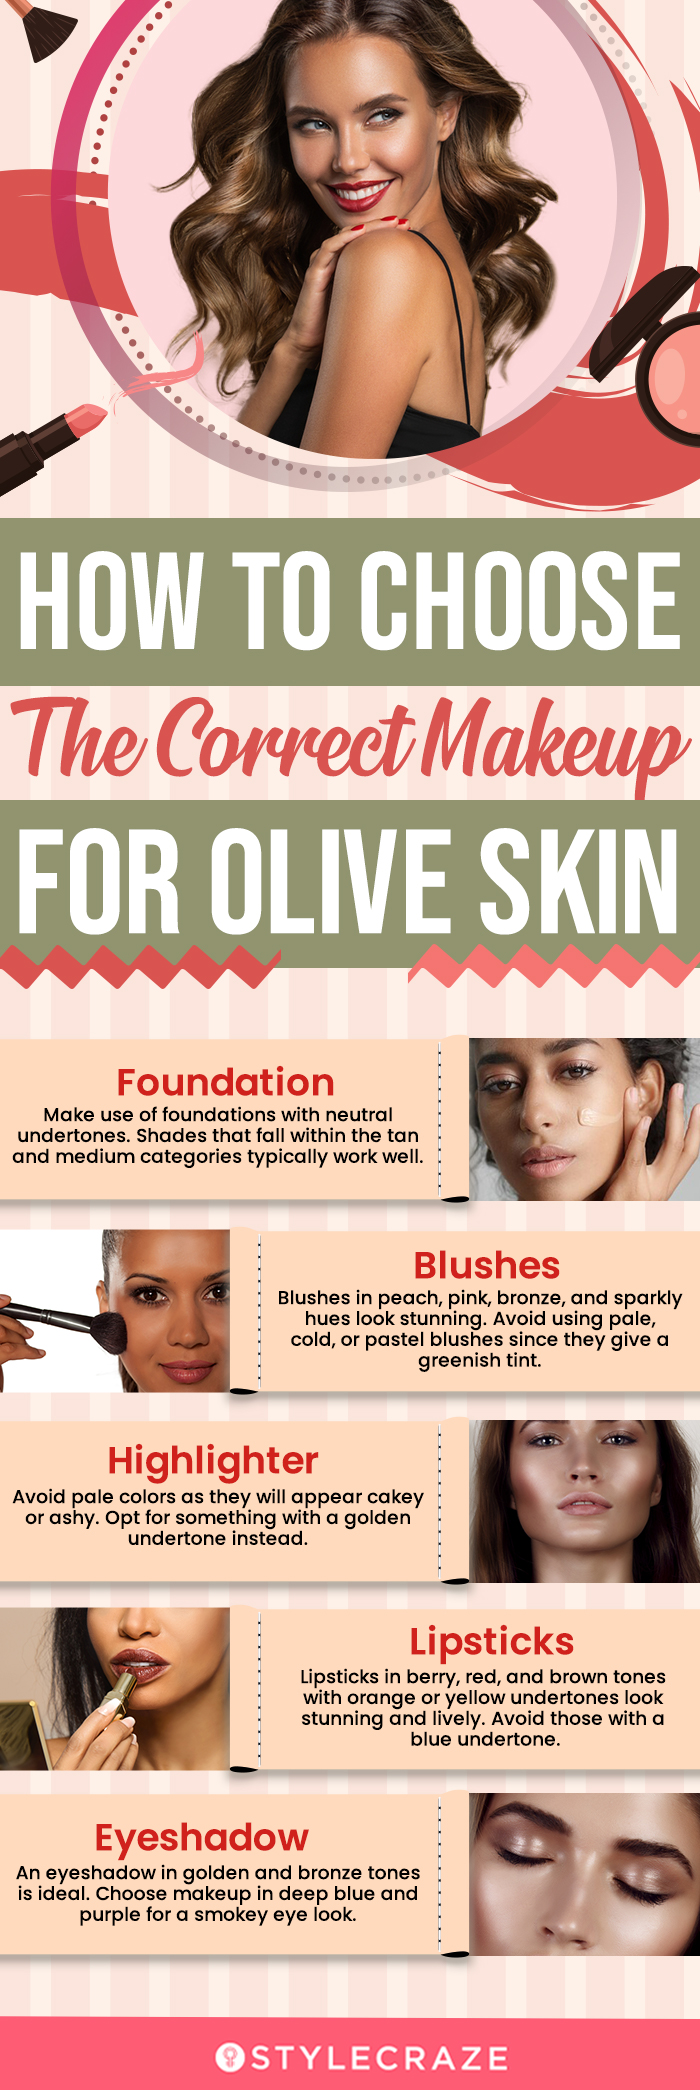 how to choose the correct makeup for olive skin (infographic)